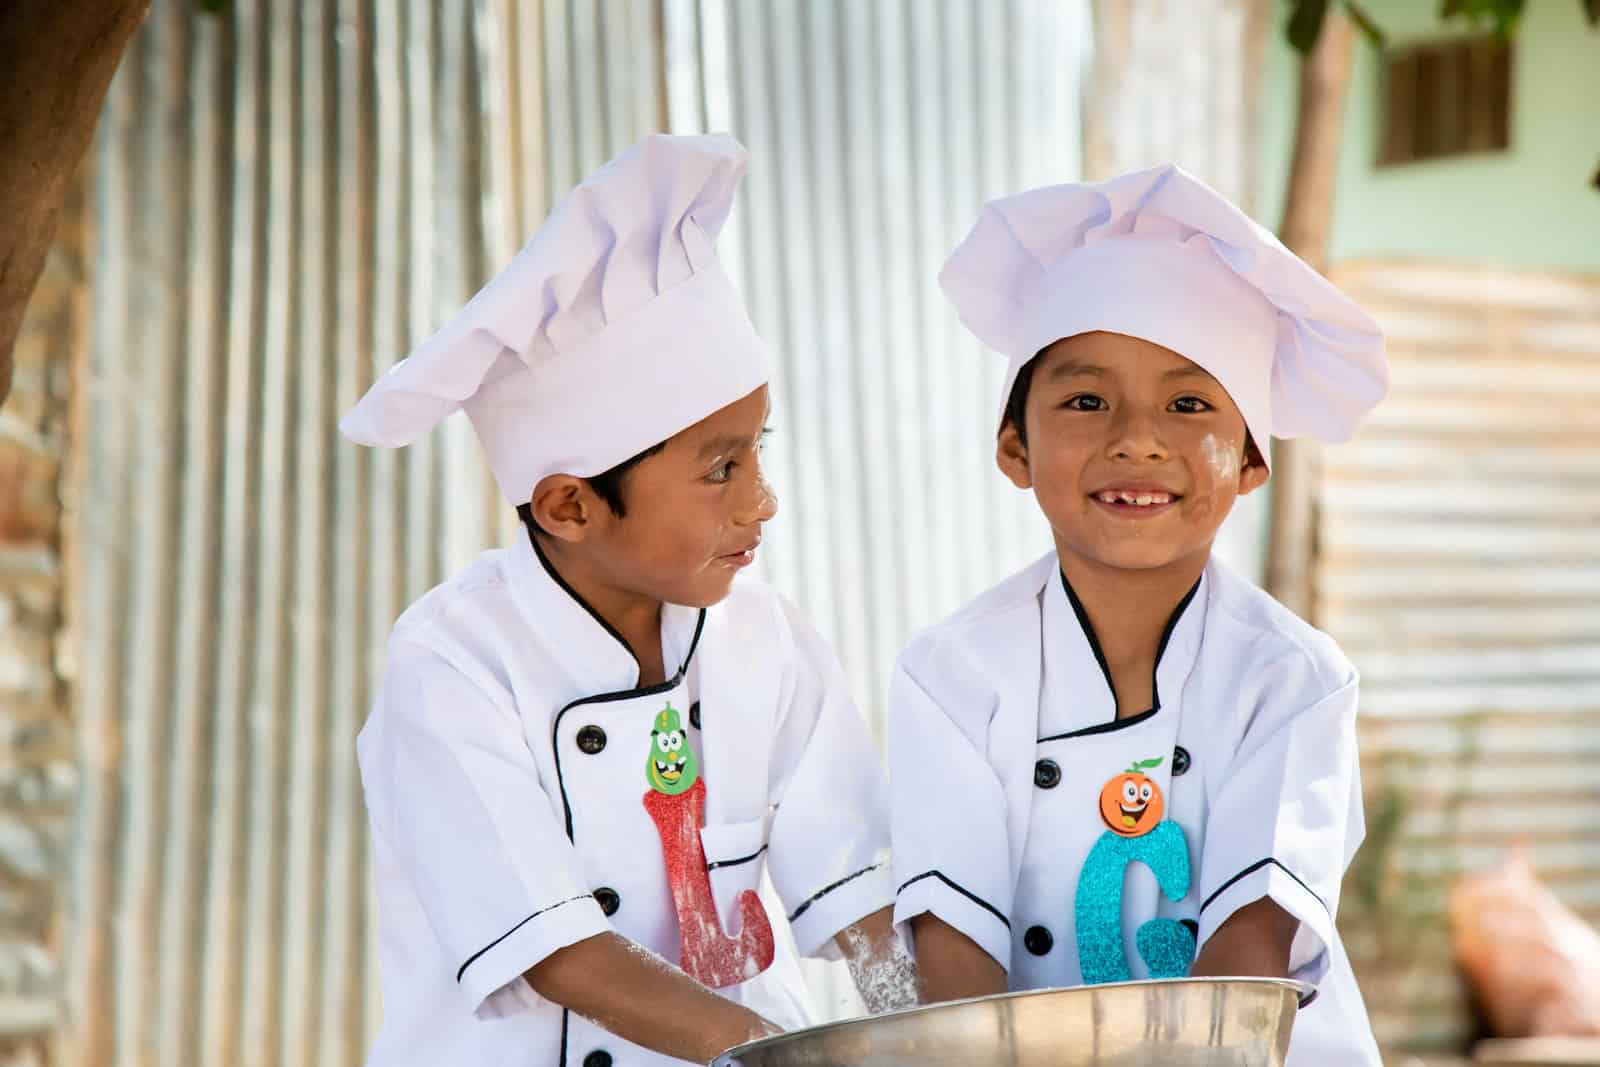 Two boys wearing chefs hats and white chefs jackets stand at a table, with their hands in a large silver bowl. One smiles at the camera and one looks at the other boy. 